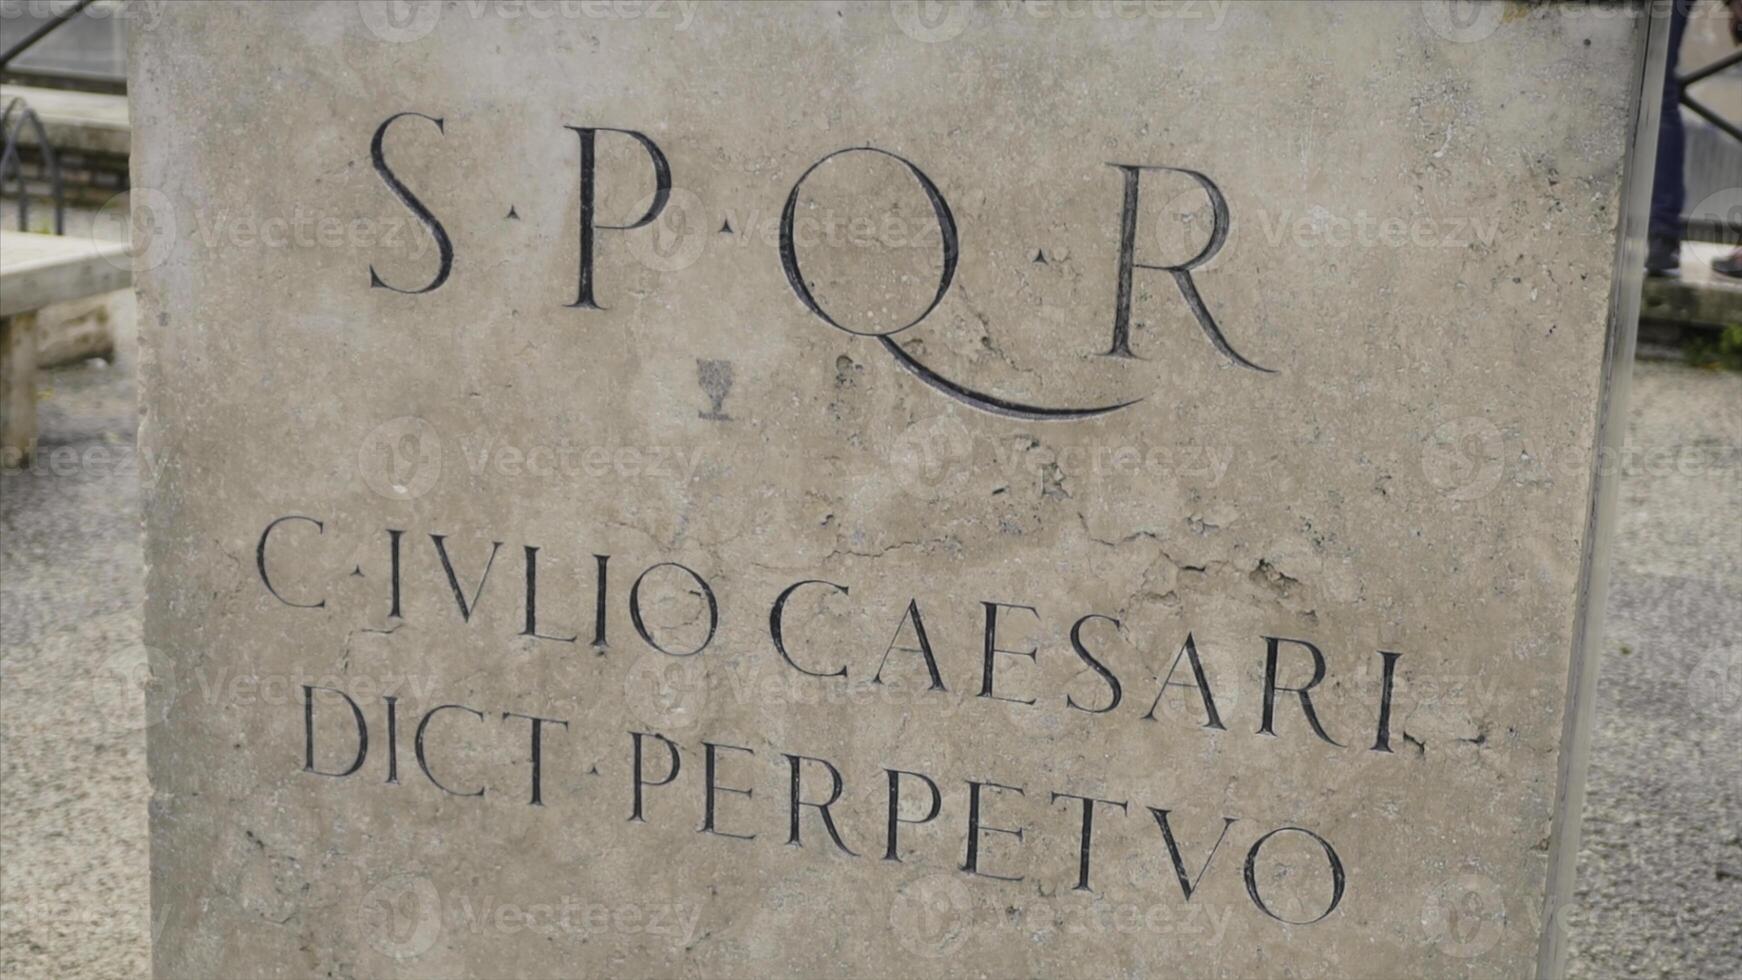 Roman writing and bas-reliefs imperial era archeology italy. Stock. SPQR inscription on the wall photo